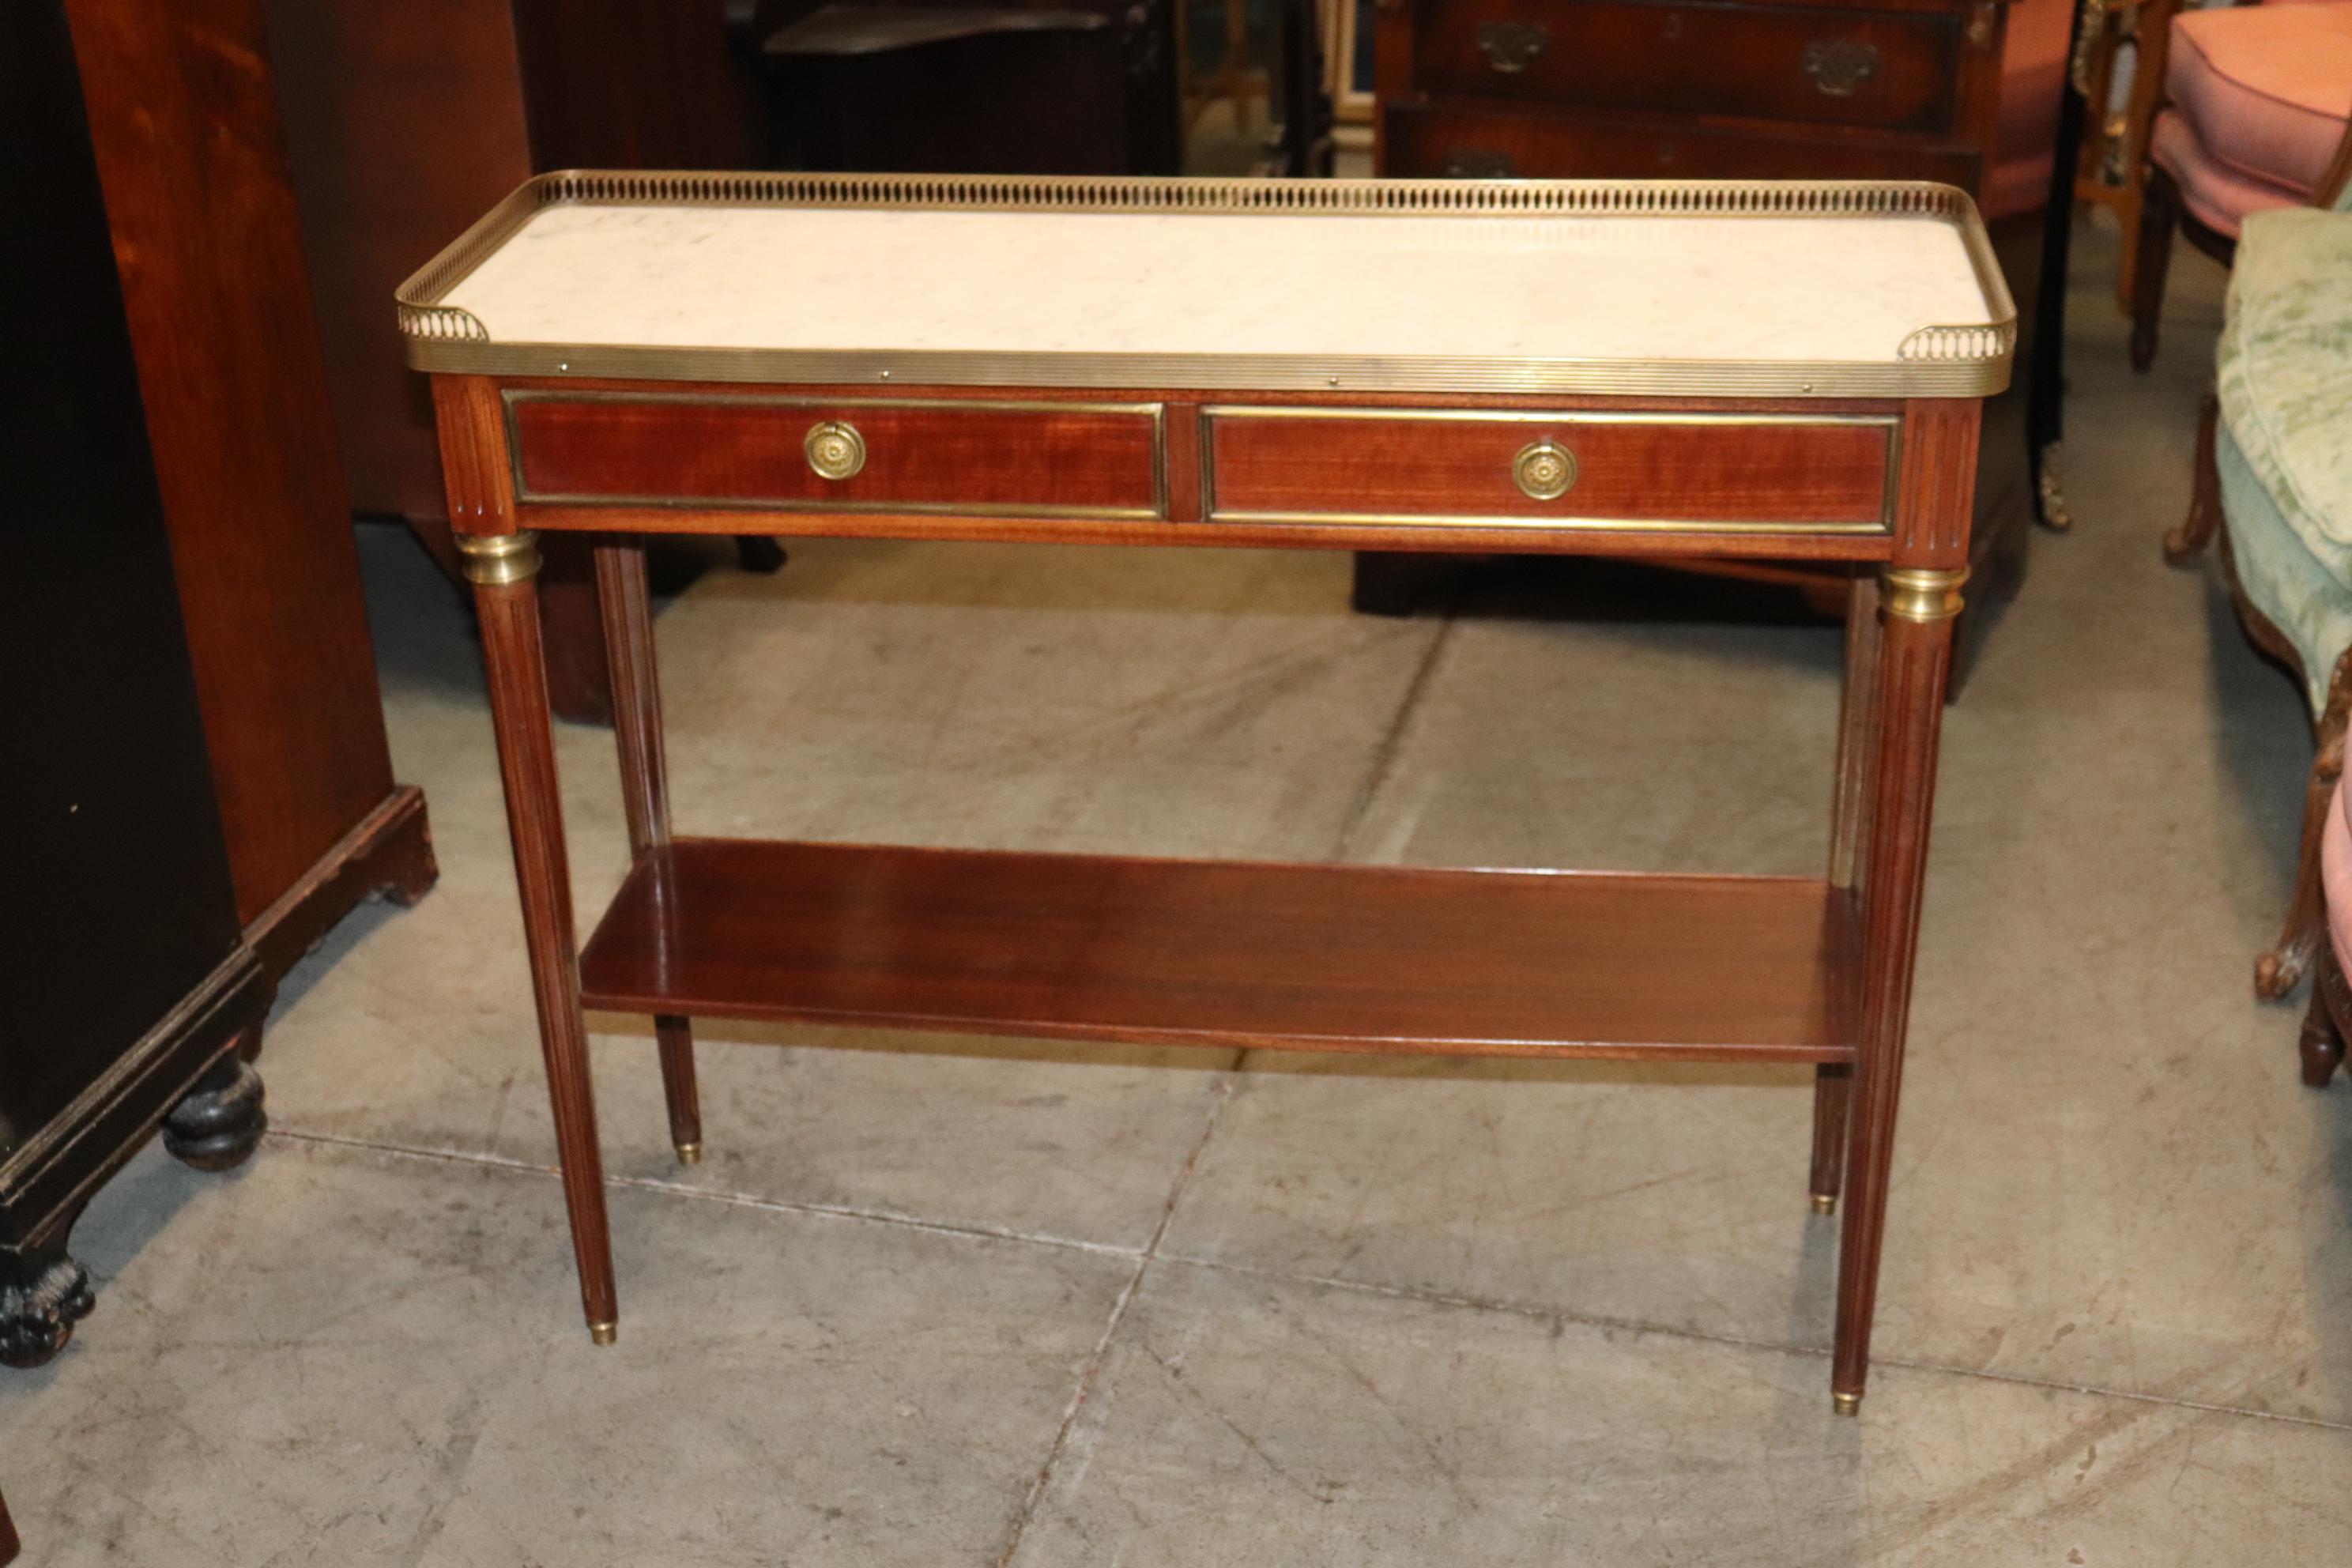 This is a fantastic small and extremely narrow table with a finished back that can be used as a sofa table. The table is brass and bronze mounted and has a gorgeous slab of carrara marble inset on top with a brass gallery. The table measures 31 tall